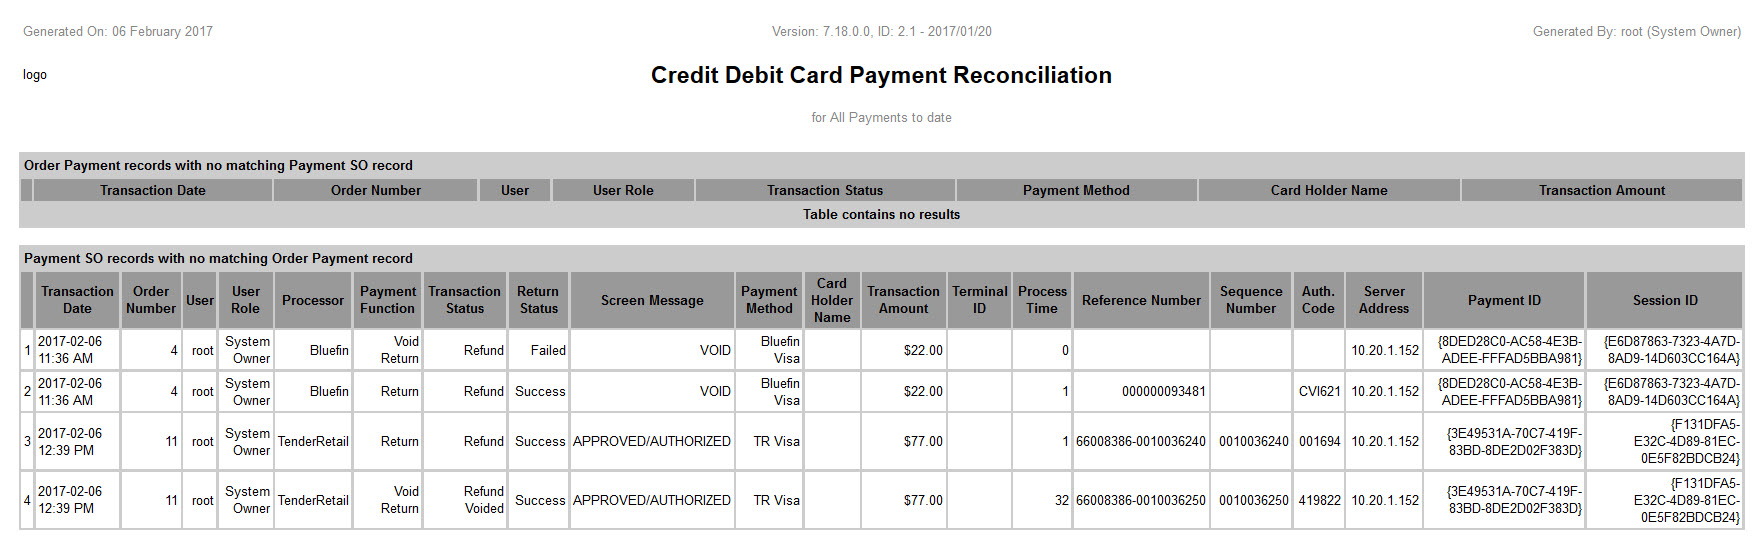 Credit Card Payment Reconciliation-7.18